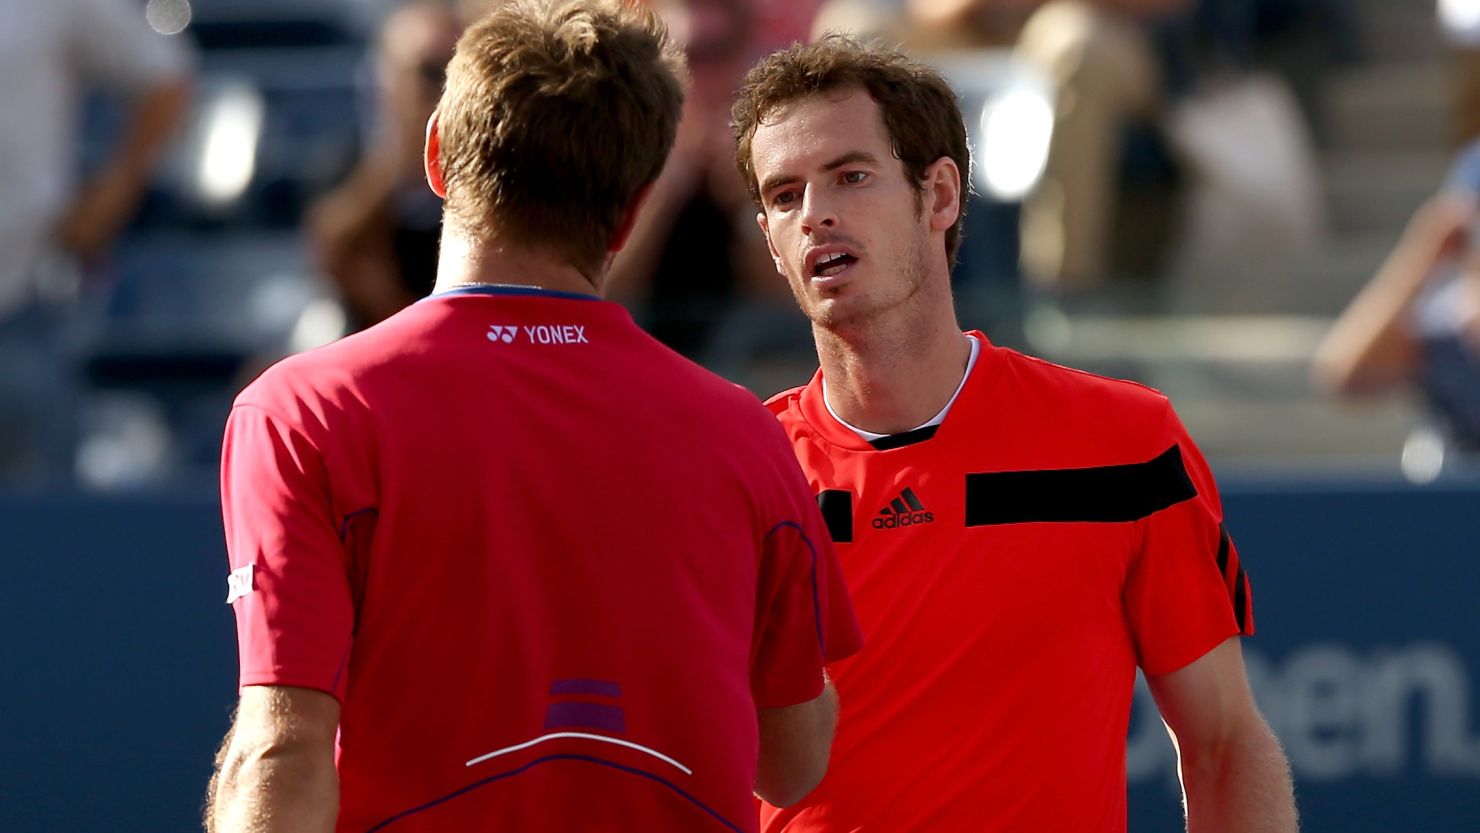 As the defending champion, Andy Murray lost to Stanislas Wawrinka in the quarterfinals of the U.S. Open. 